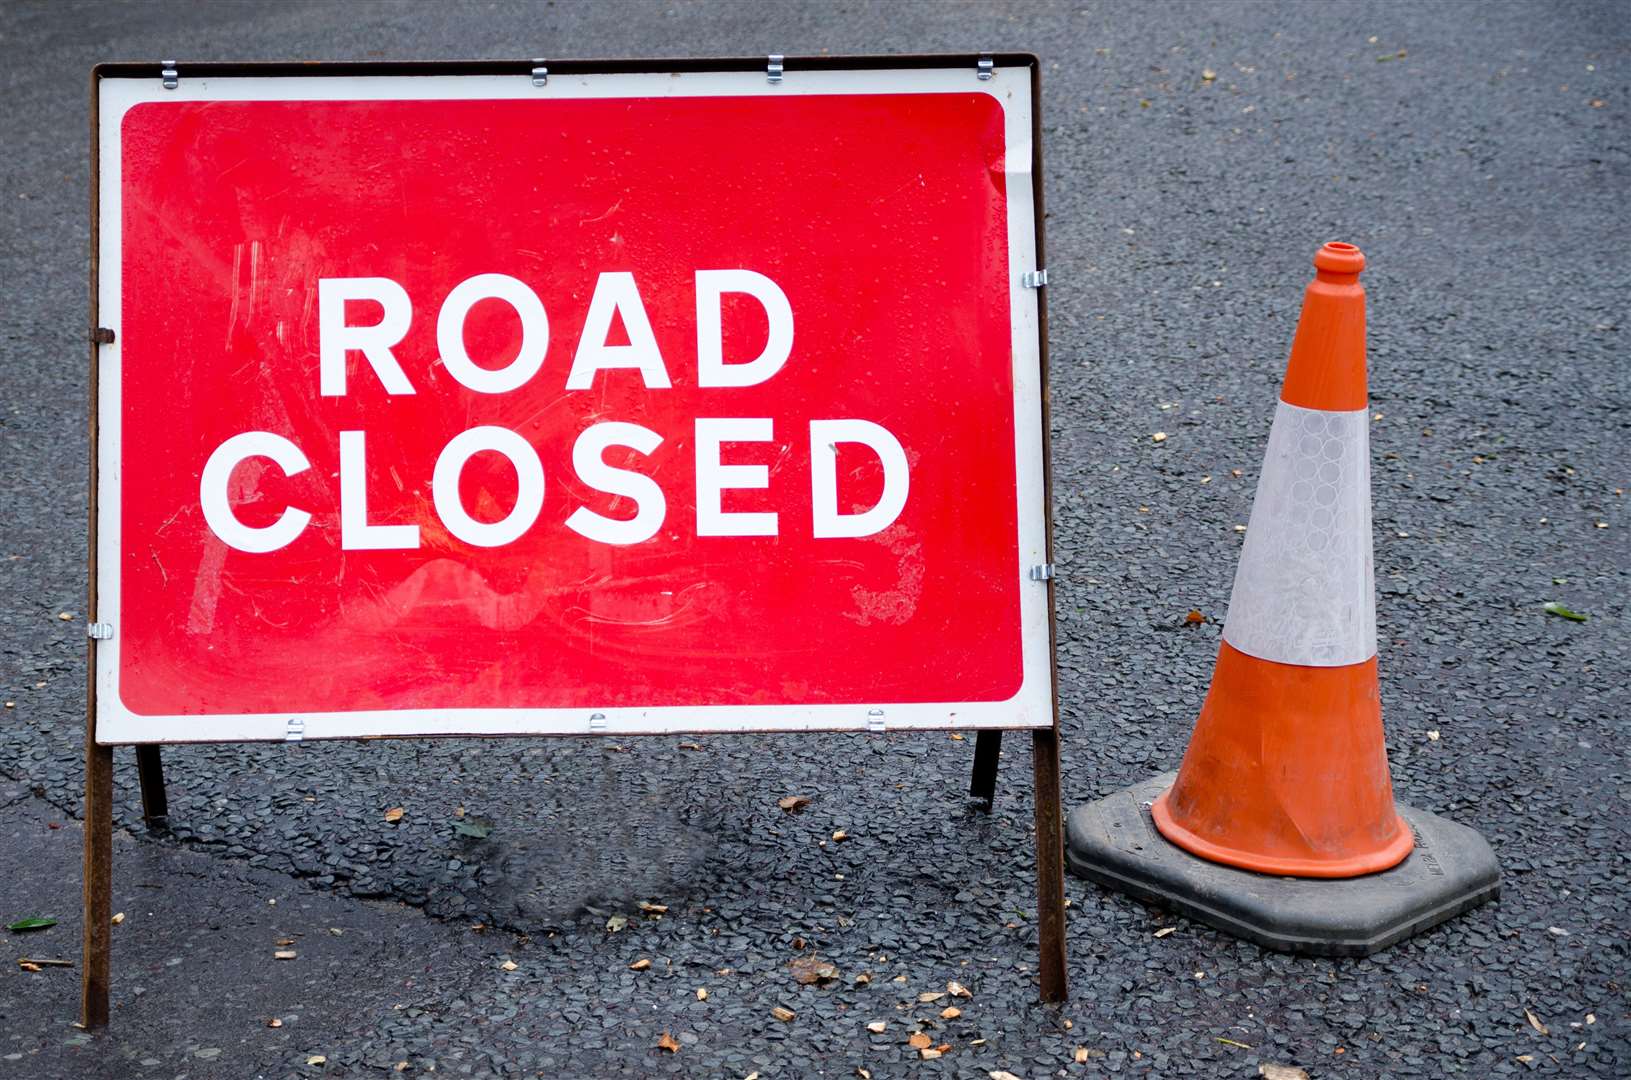 Drivers in the Sudbury area have been warned about roadwork delays. Picture: Stock image